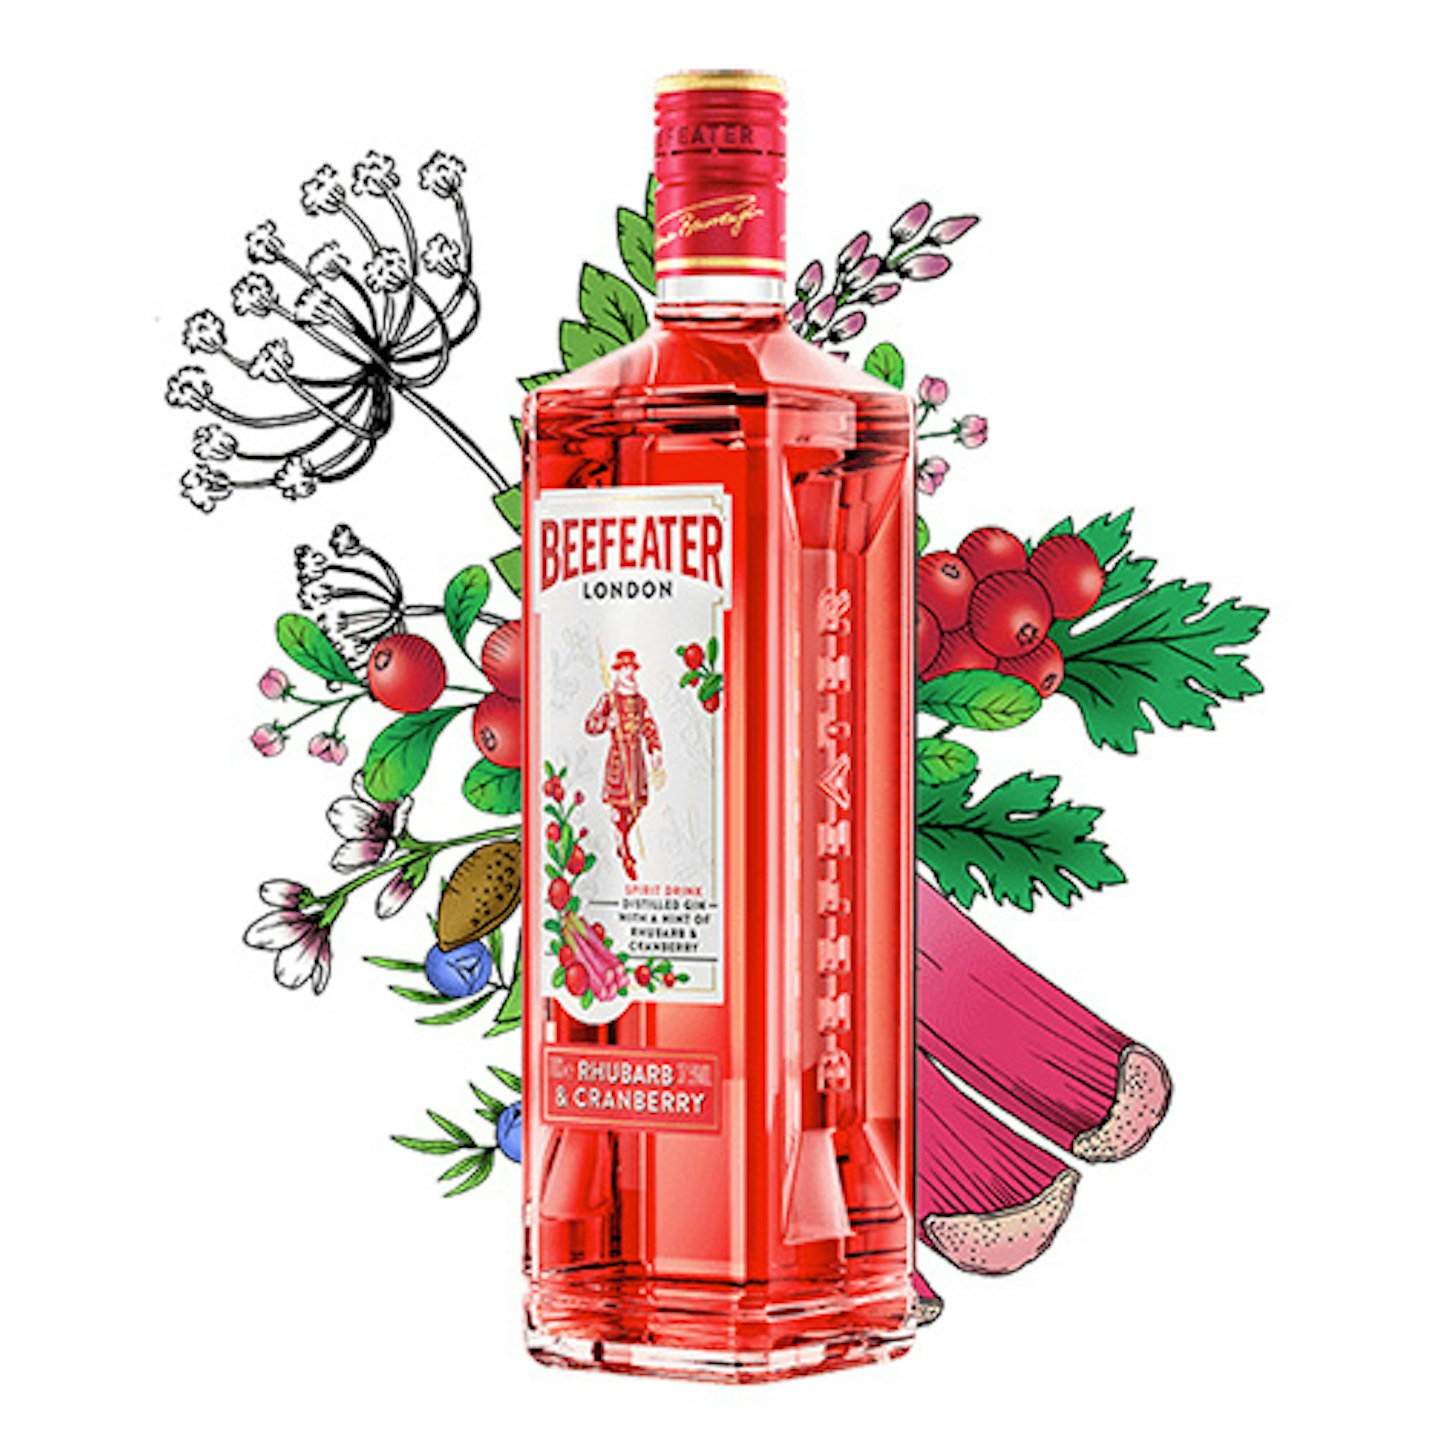 Beefeater Rhubarb & Cranberry